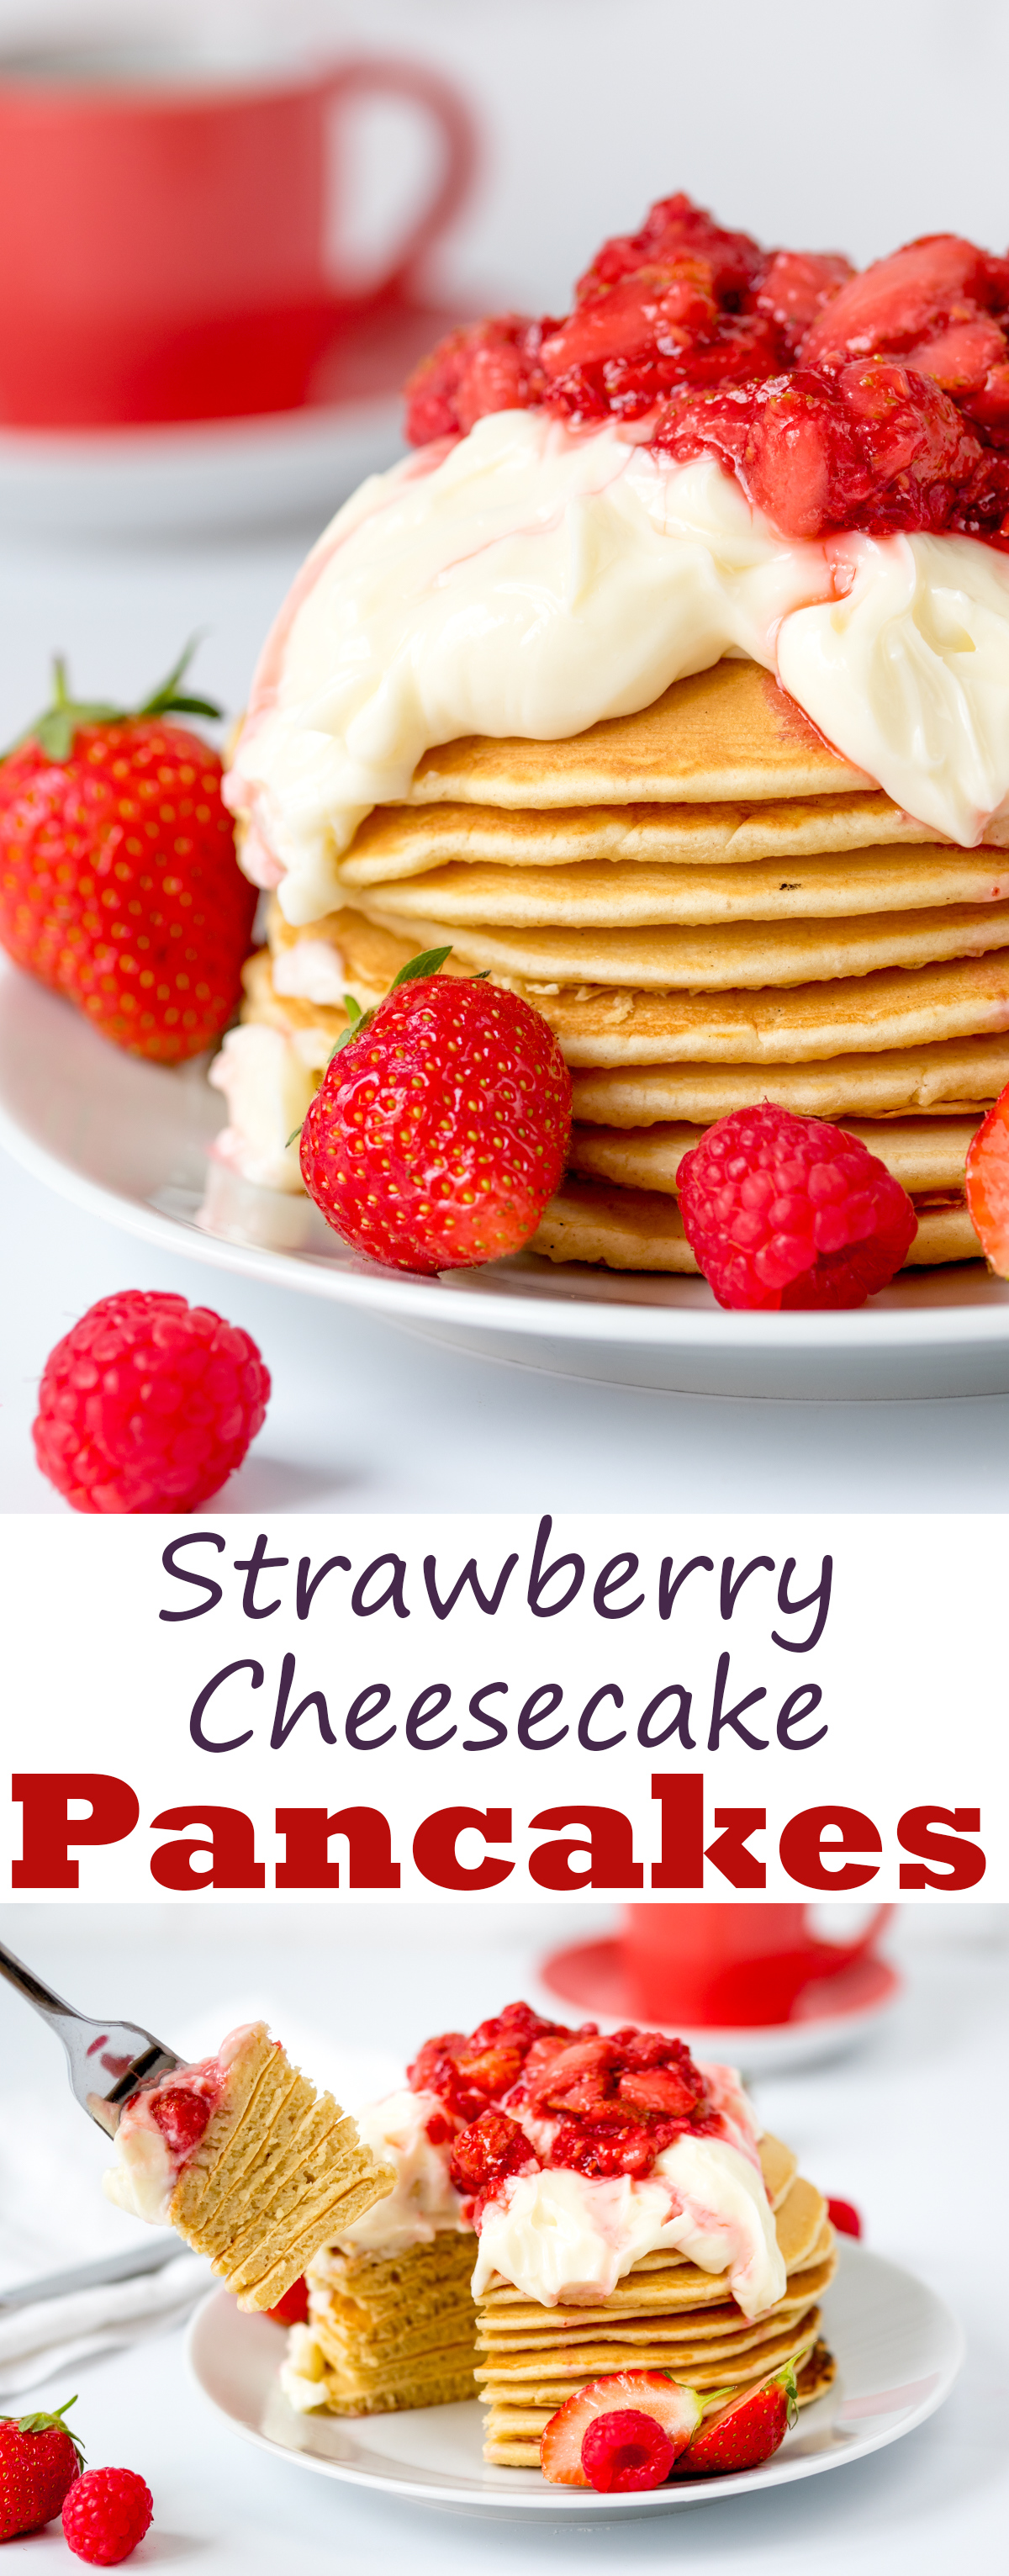 Fluffy pancakes with a simple cheesecake and strawberry compote topping!